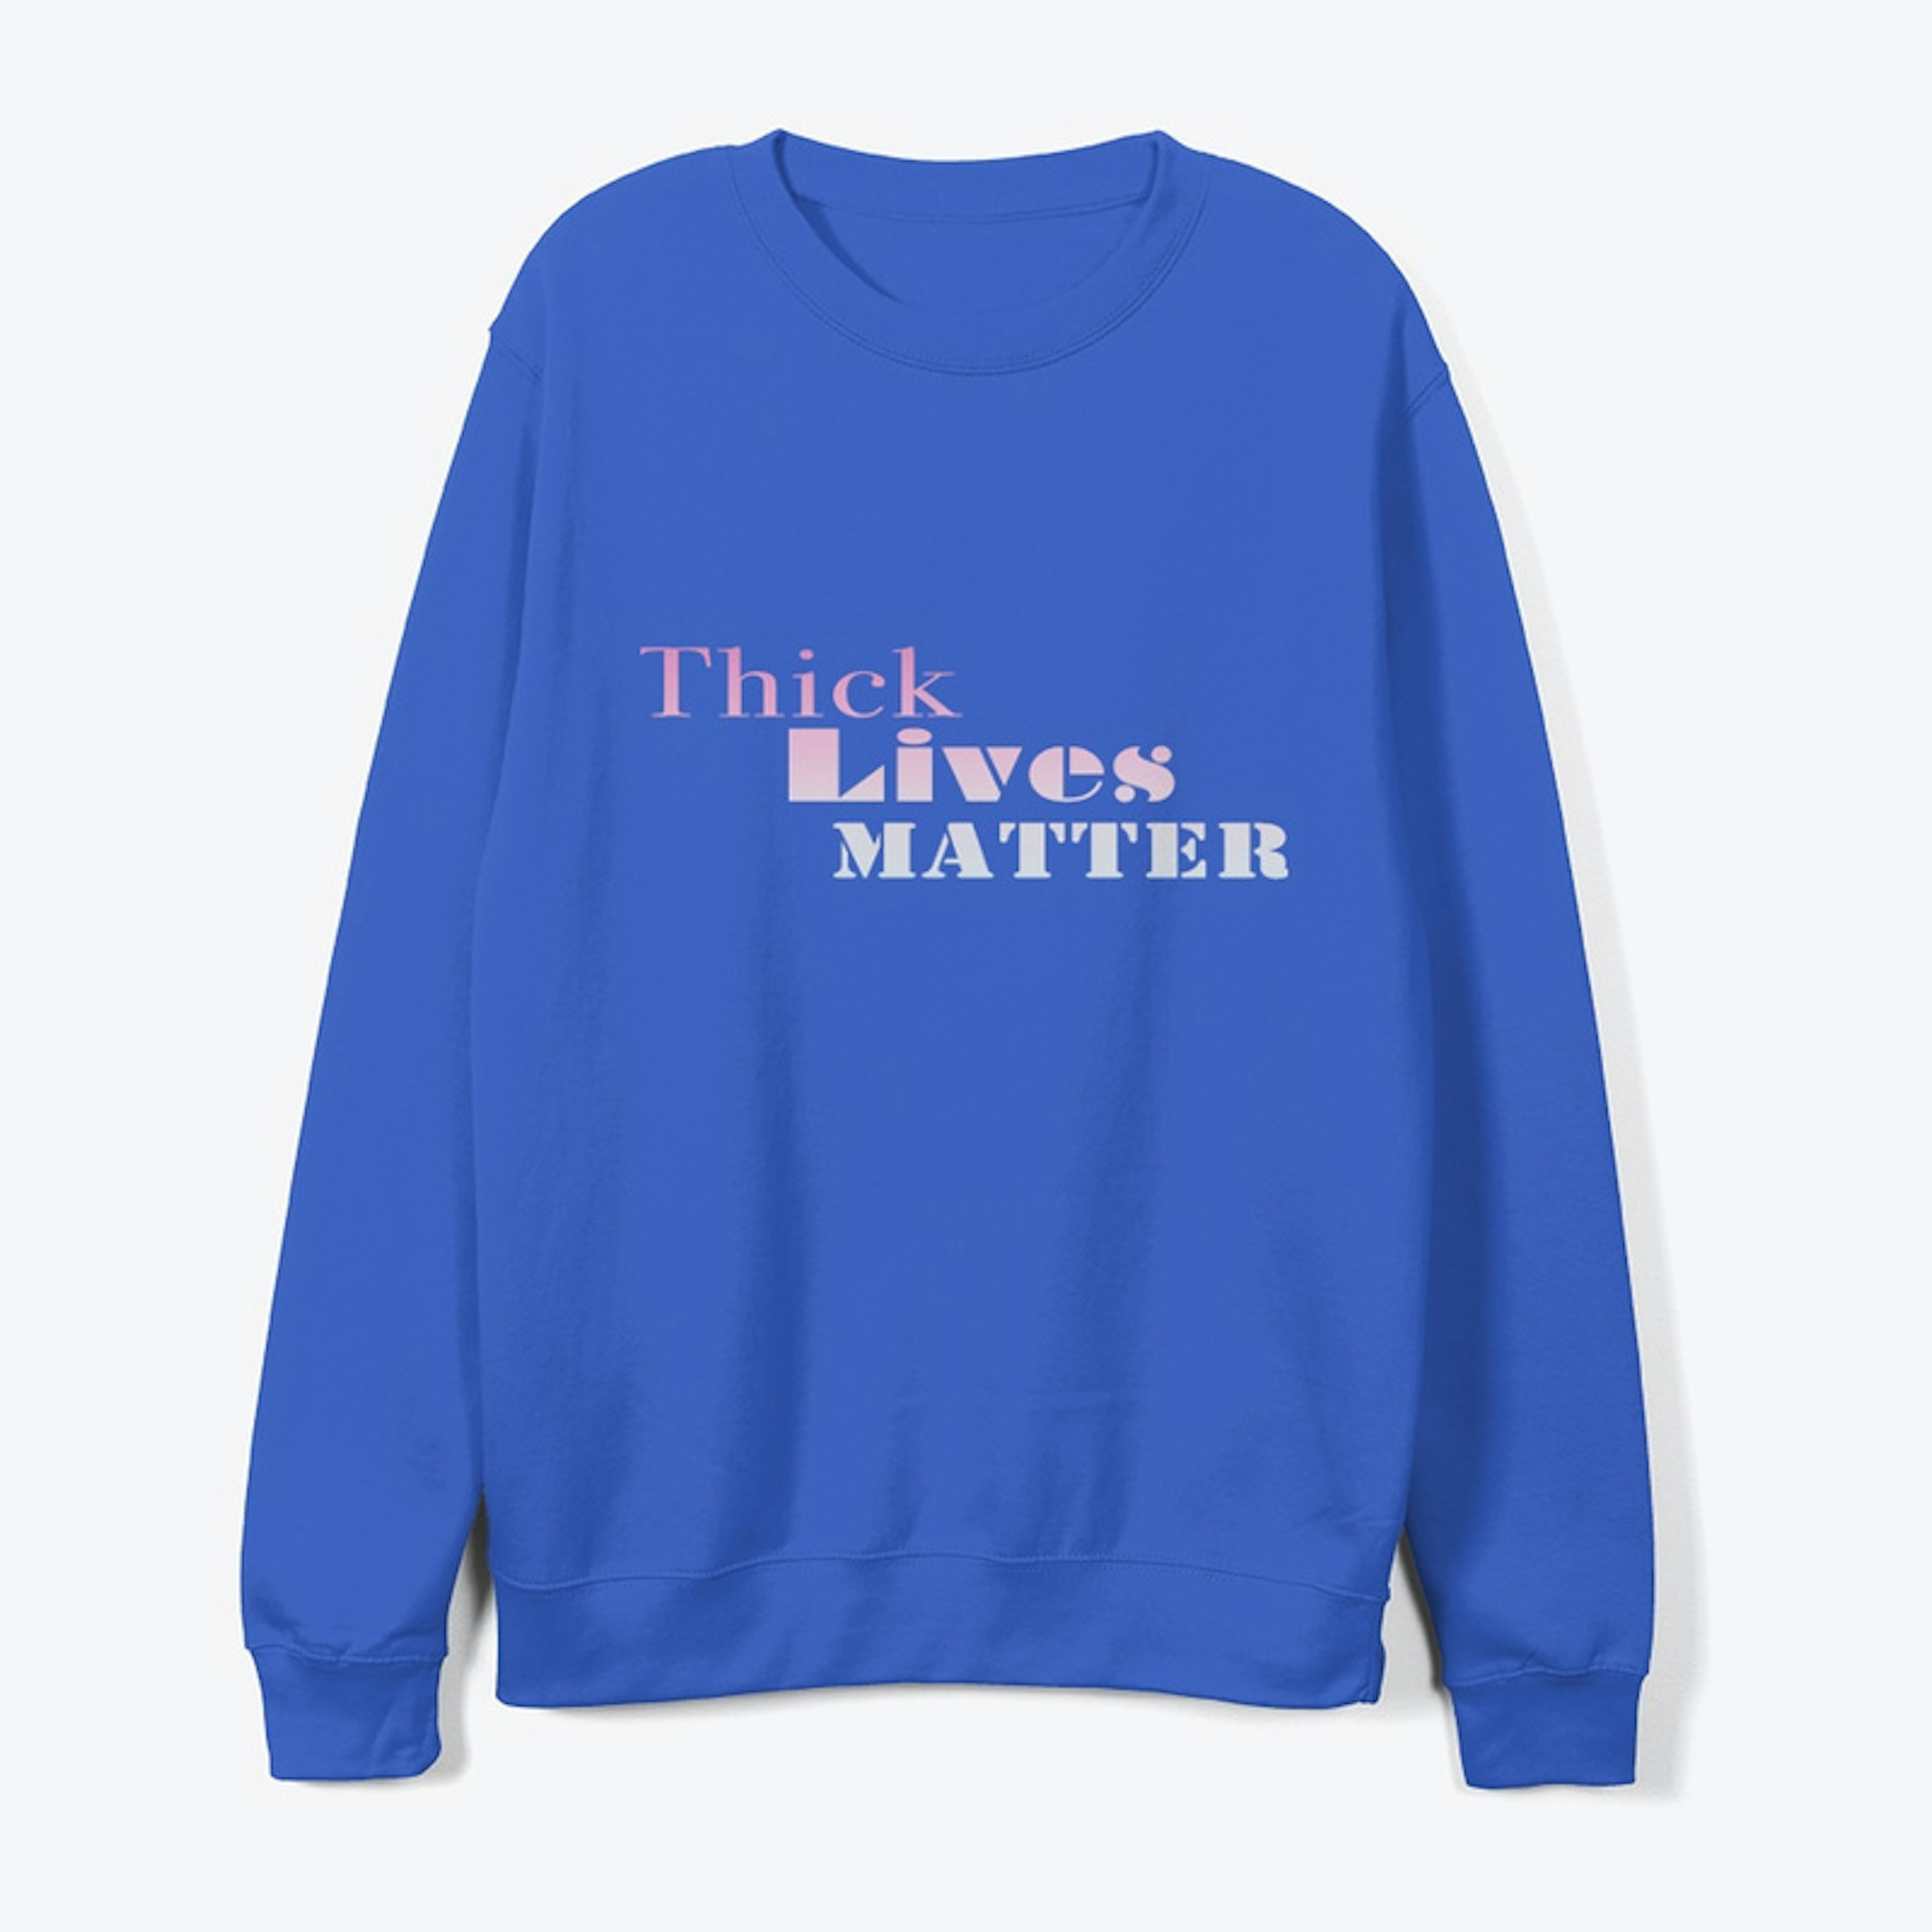 Thick Lives Matter Collection